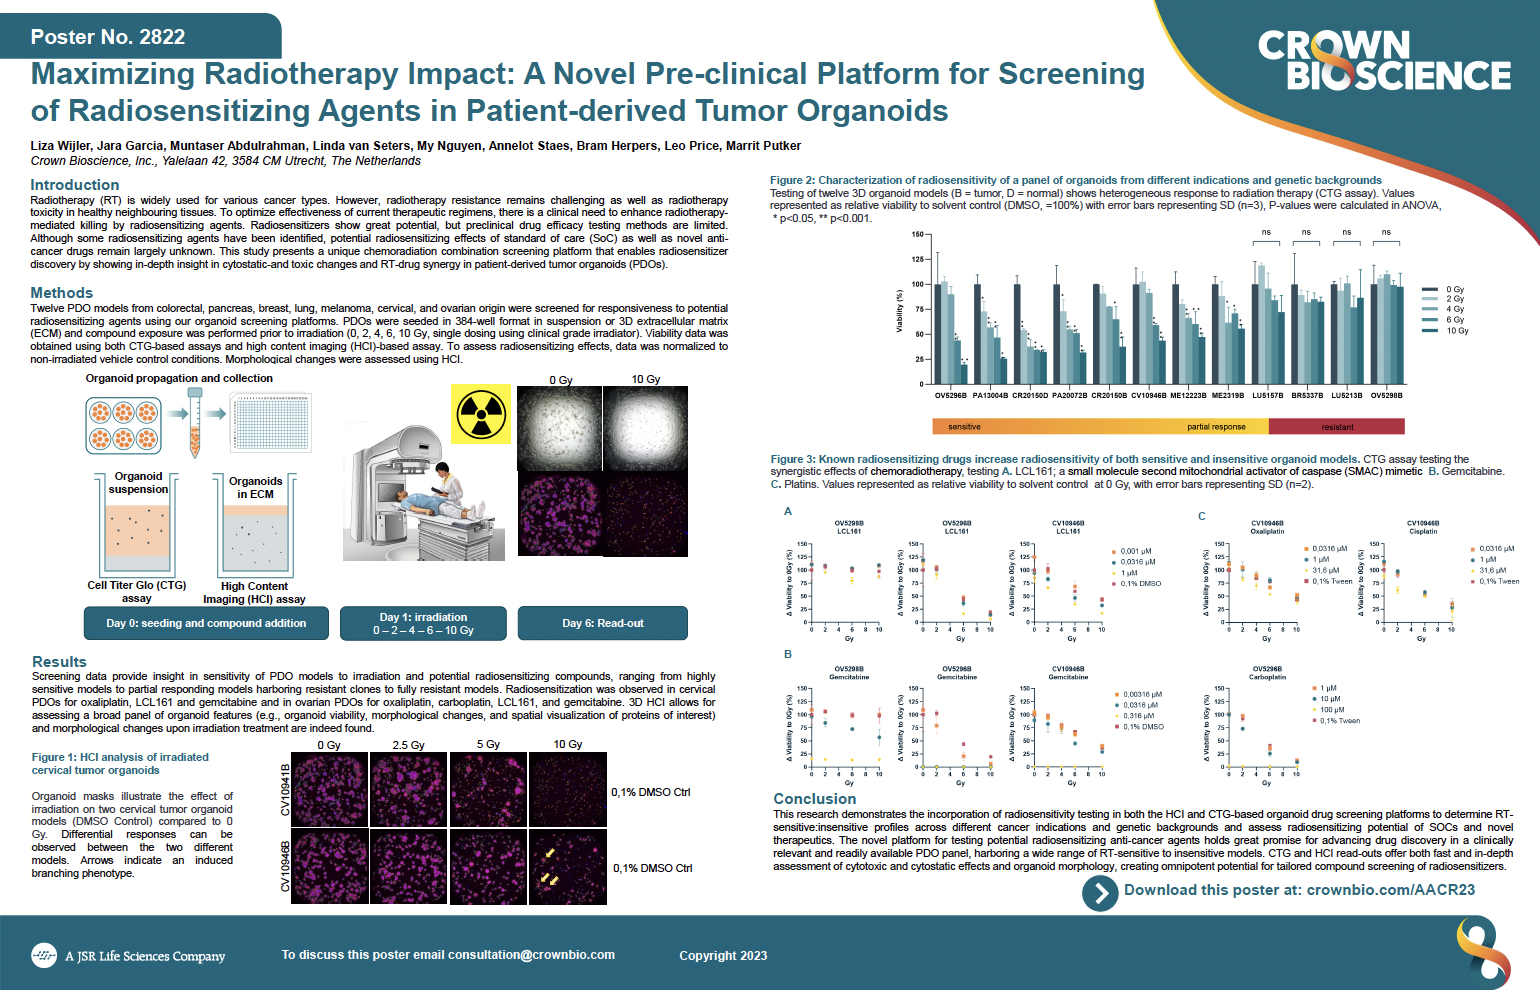 AACR 2023 Posters 2822: Maximizing Radiotherapy Impact: A Novel Preclinical Platform for Screening of Radiosensitizing Agents in Patient-derived Tumor Organoids